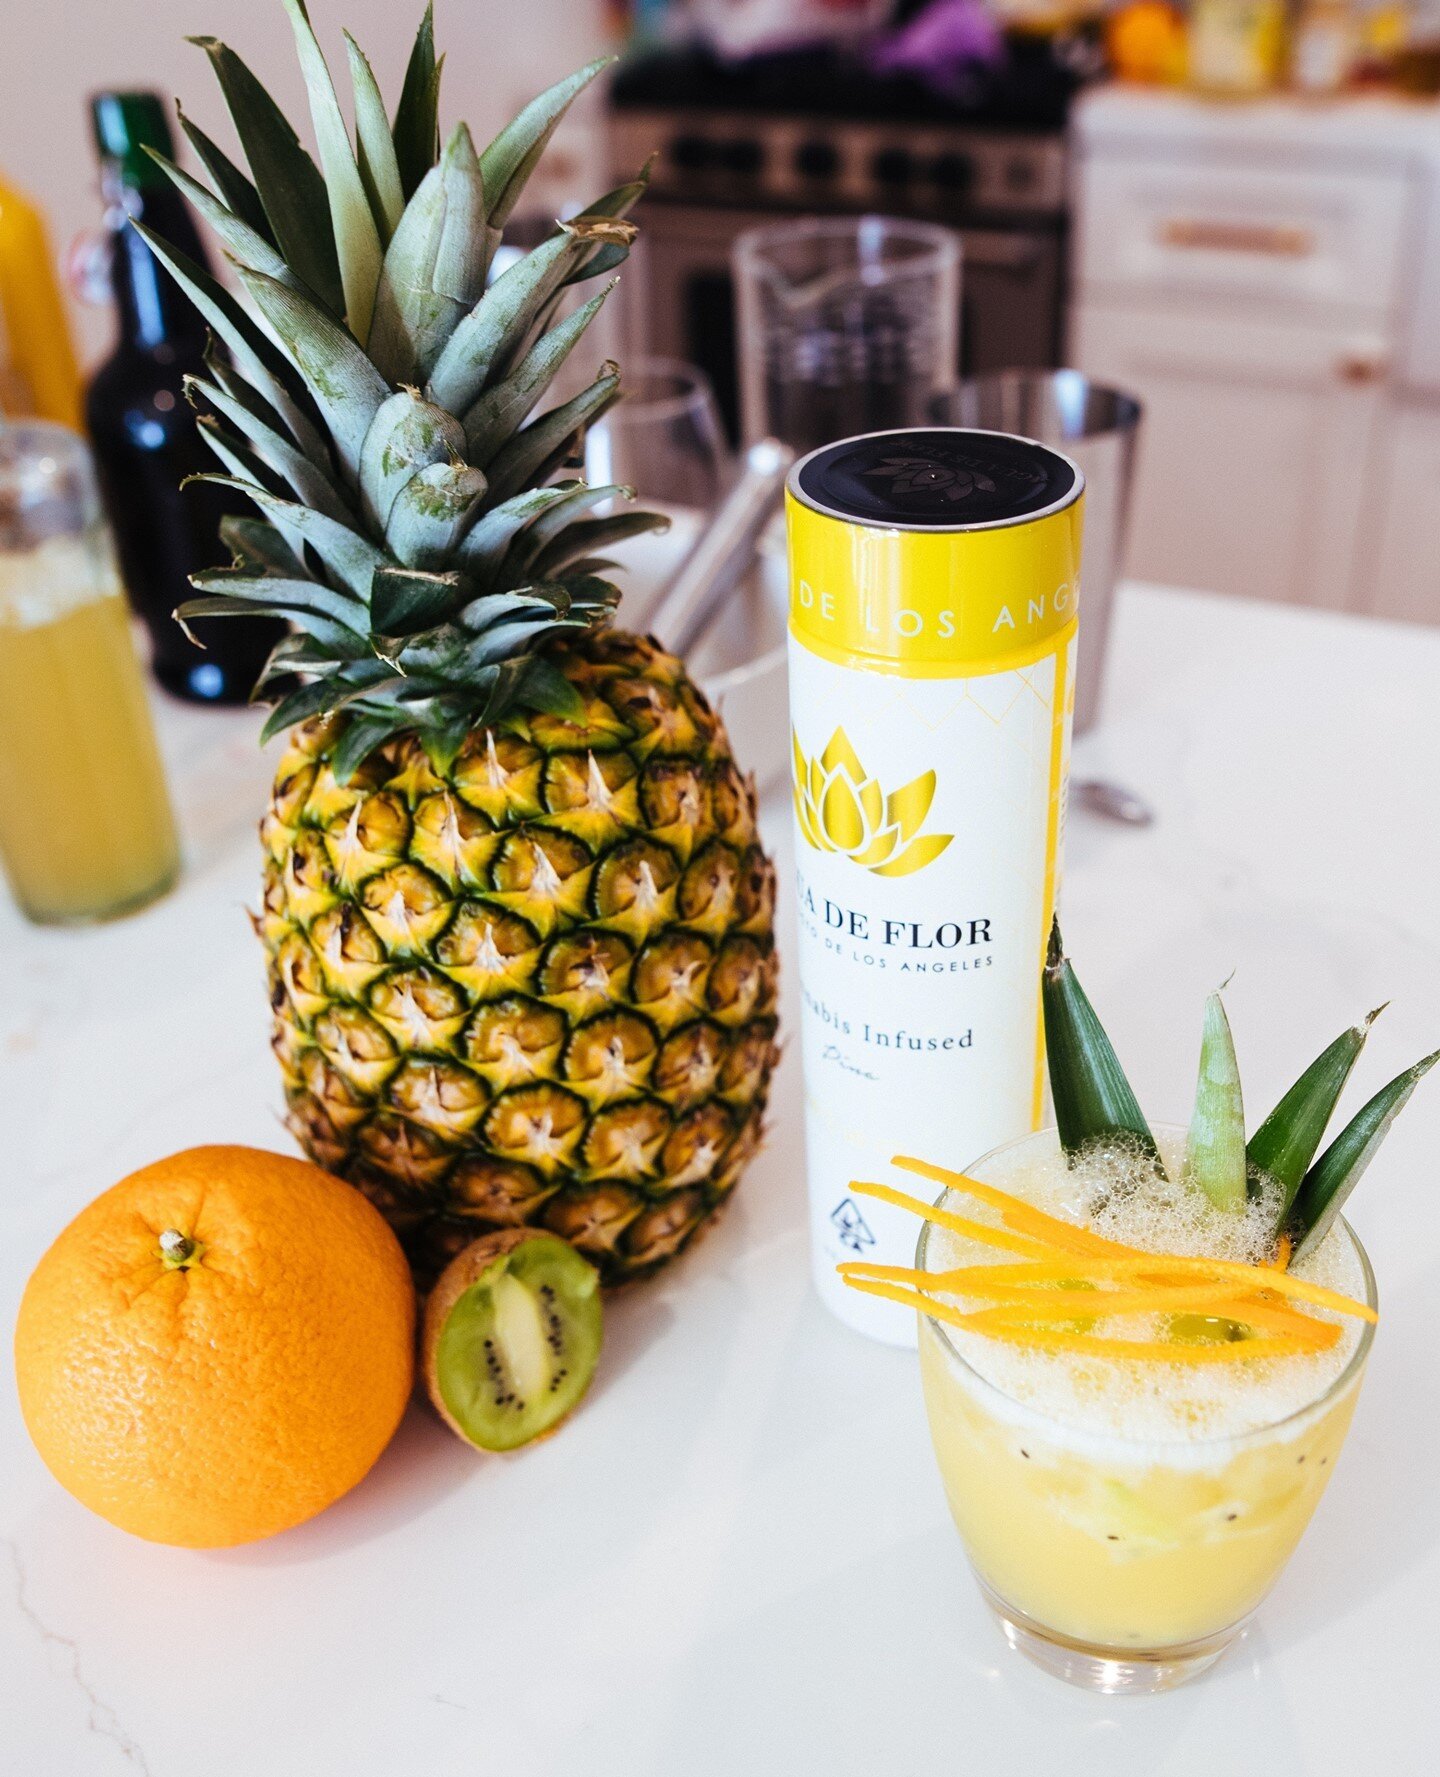 The coolest mocktails are the ones you least expect. This summer enjoy the refreshing combination of 🍍+ 🍊 + 🥝 + 🍋